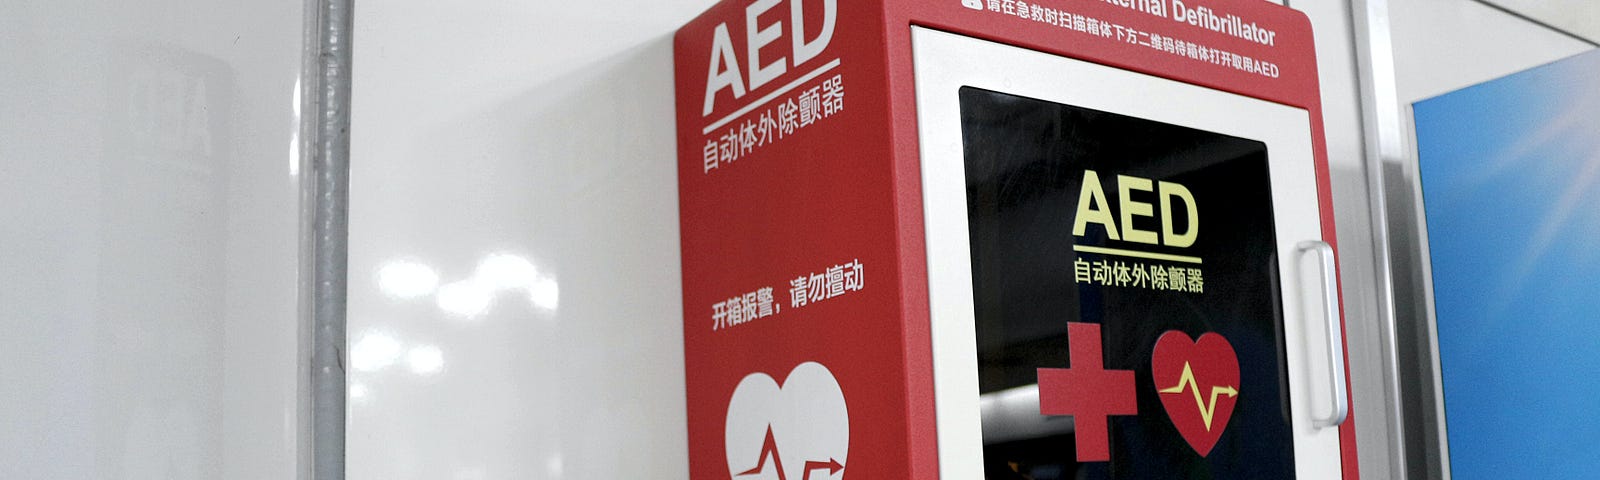 An AED (Automated External Defibrillator) in a red and white wall cabinet.